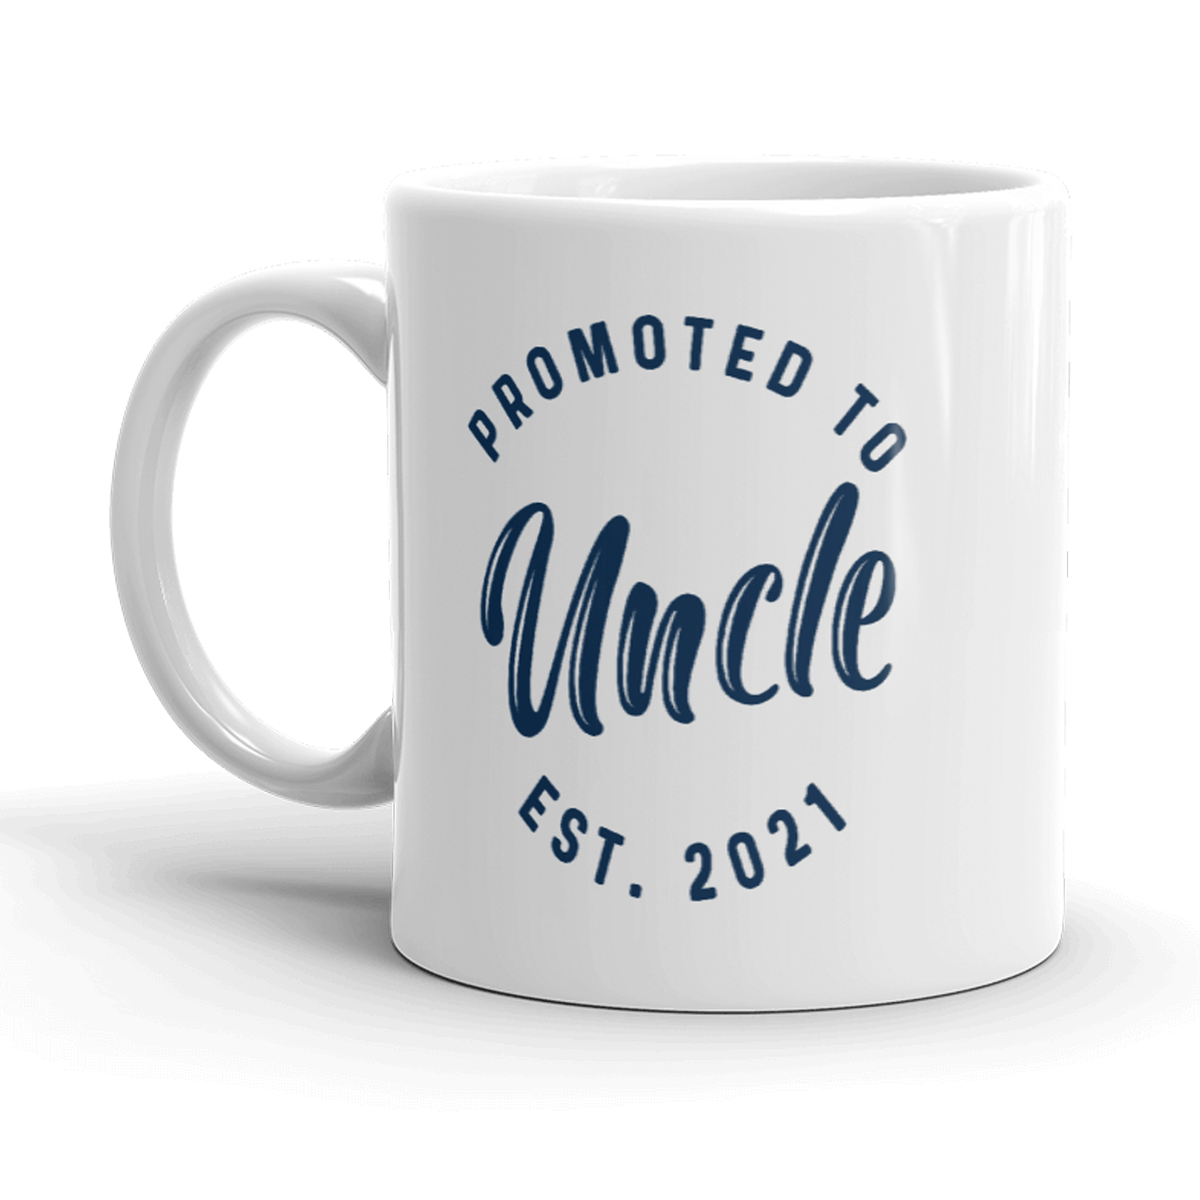 Promoted To Uncle 2021 Mug Funny New Baby Family Graphic Coffee Cup-11oz - Crazy Dog T-Shirts